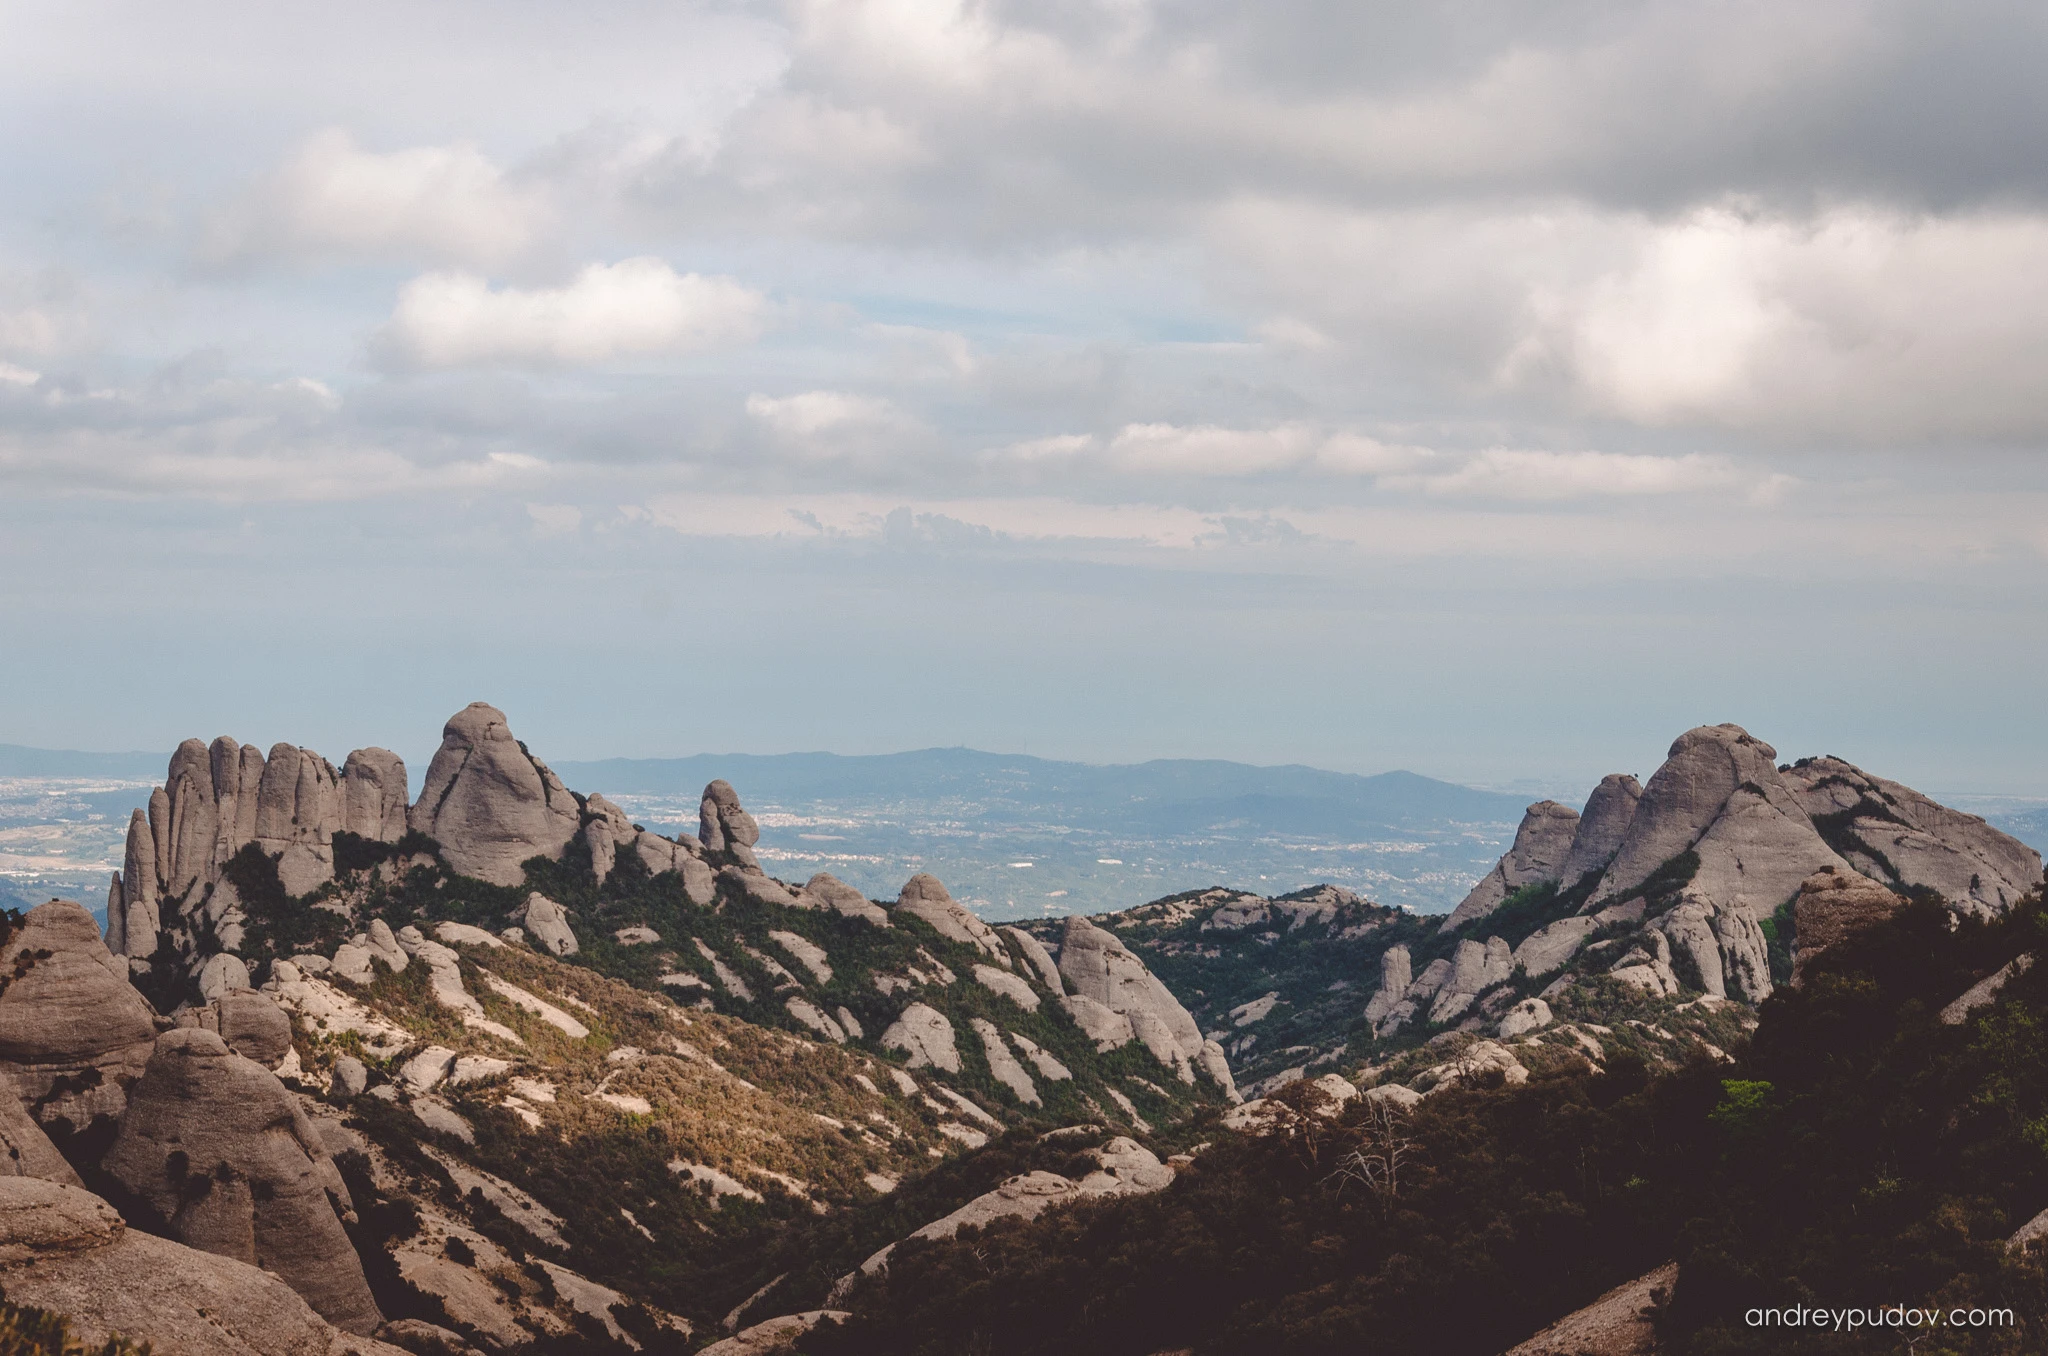 Montserrat - The highest summit of Montserrat is called Sant Jeroni and stands at 1,236 meters above sea-level. It is accessible by hiking trails which connect from the top entrance to the Sant Joan funicular, the monastery, or the base of the mountain.